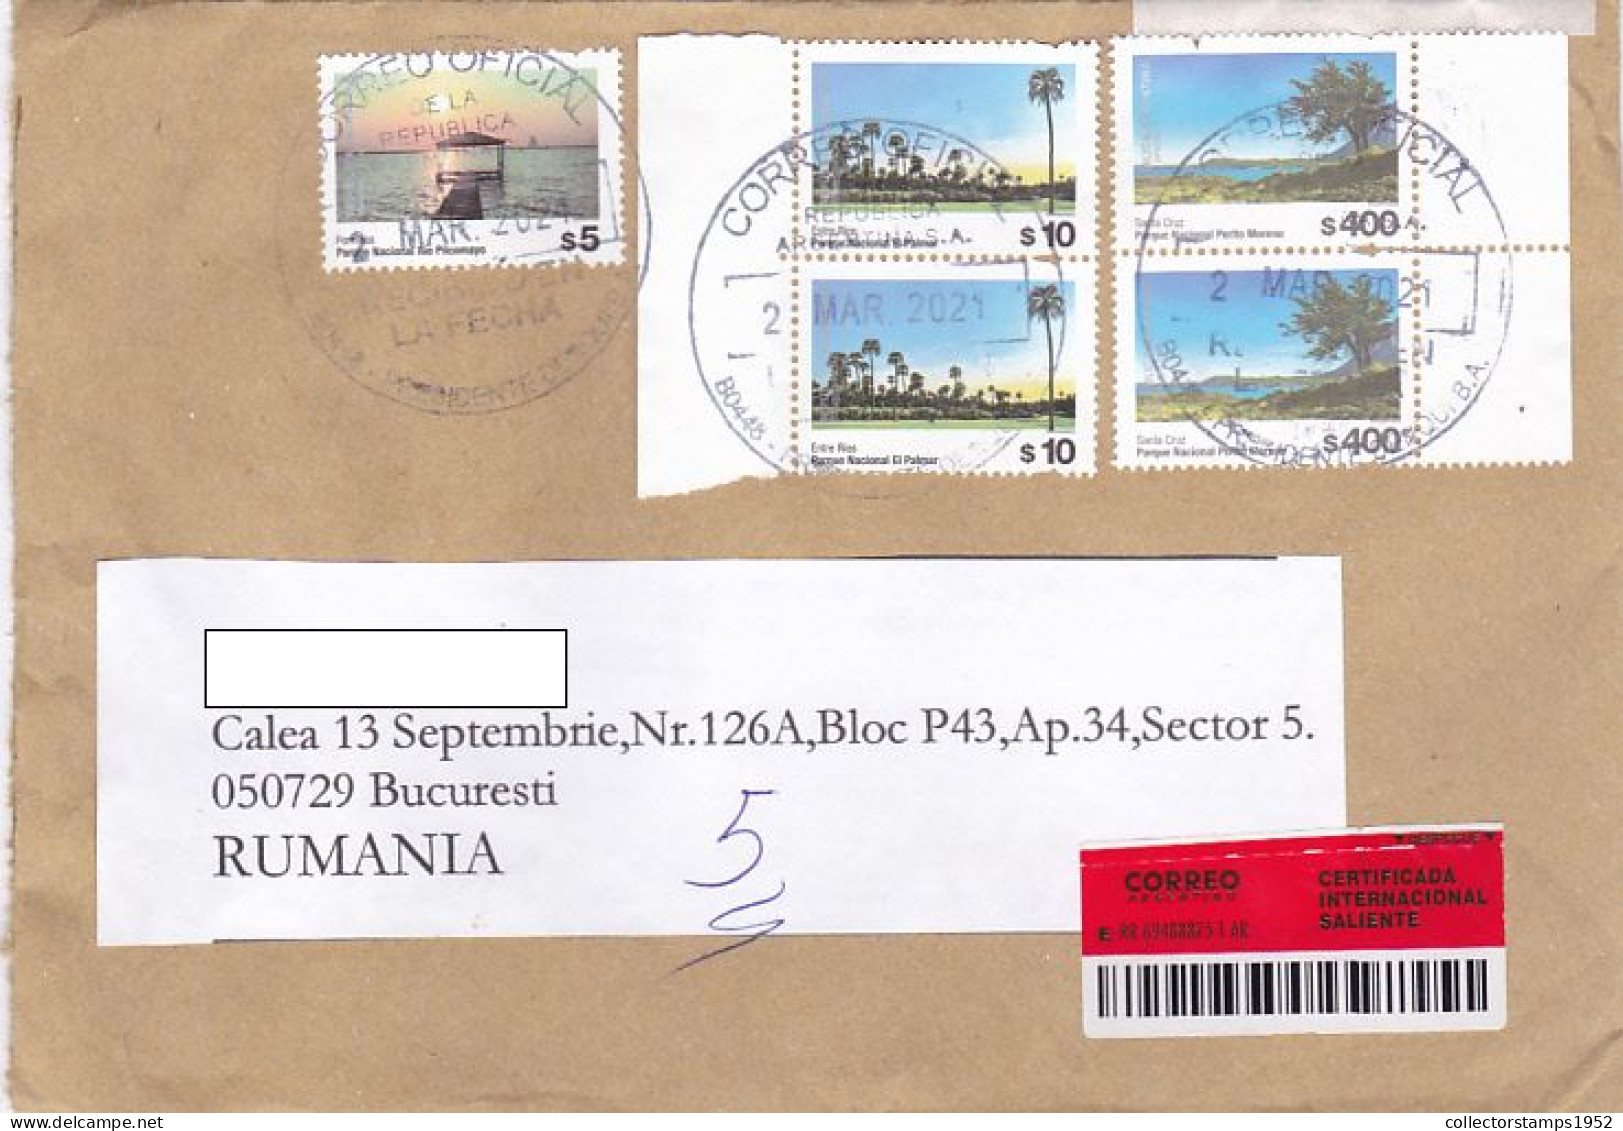 PIER, LANDSCAPES, FINE STAMPS ON REGISTERED COVER, 2021, ARGENTINA - Covers & Documents